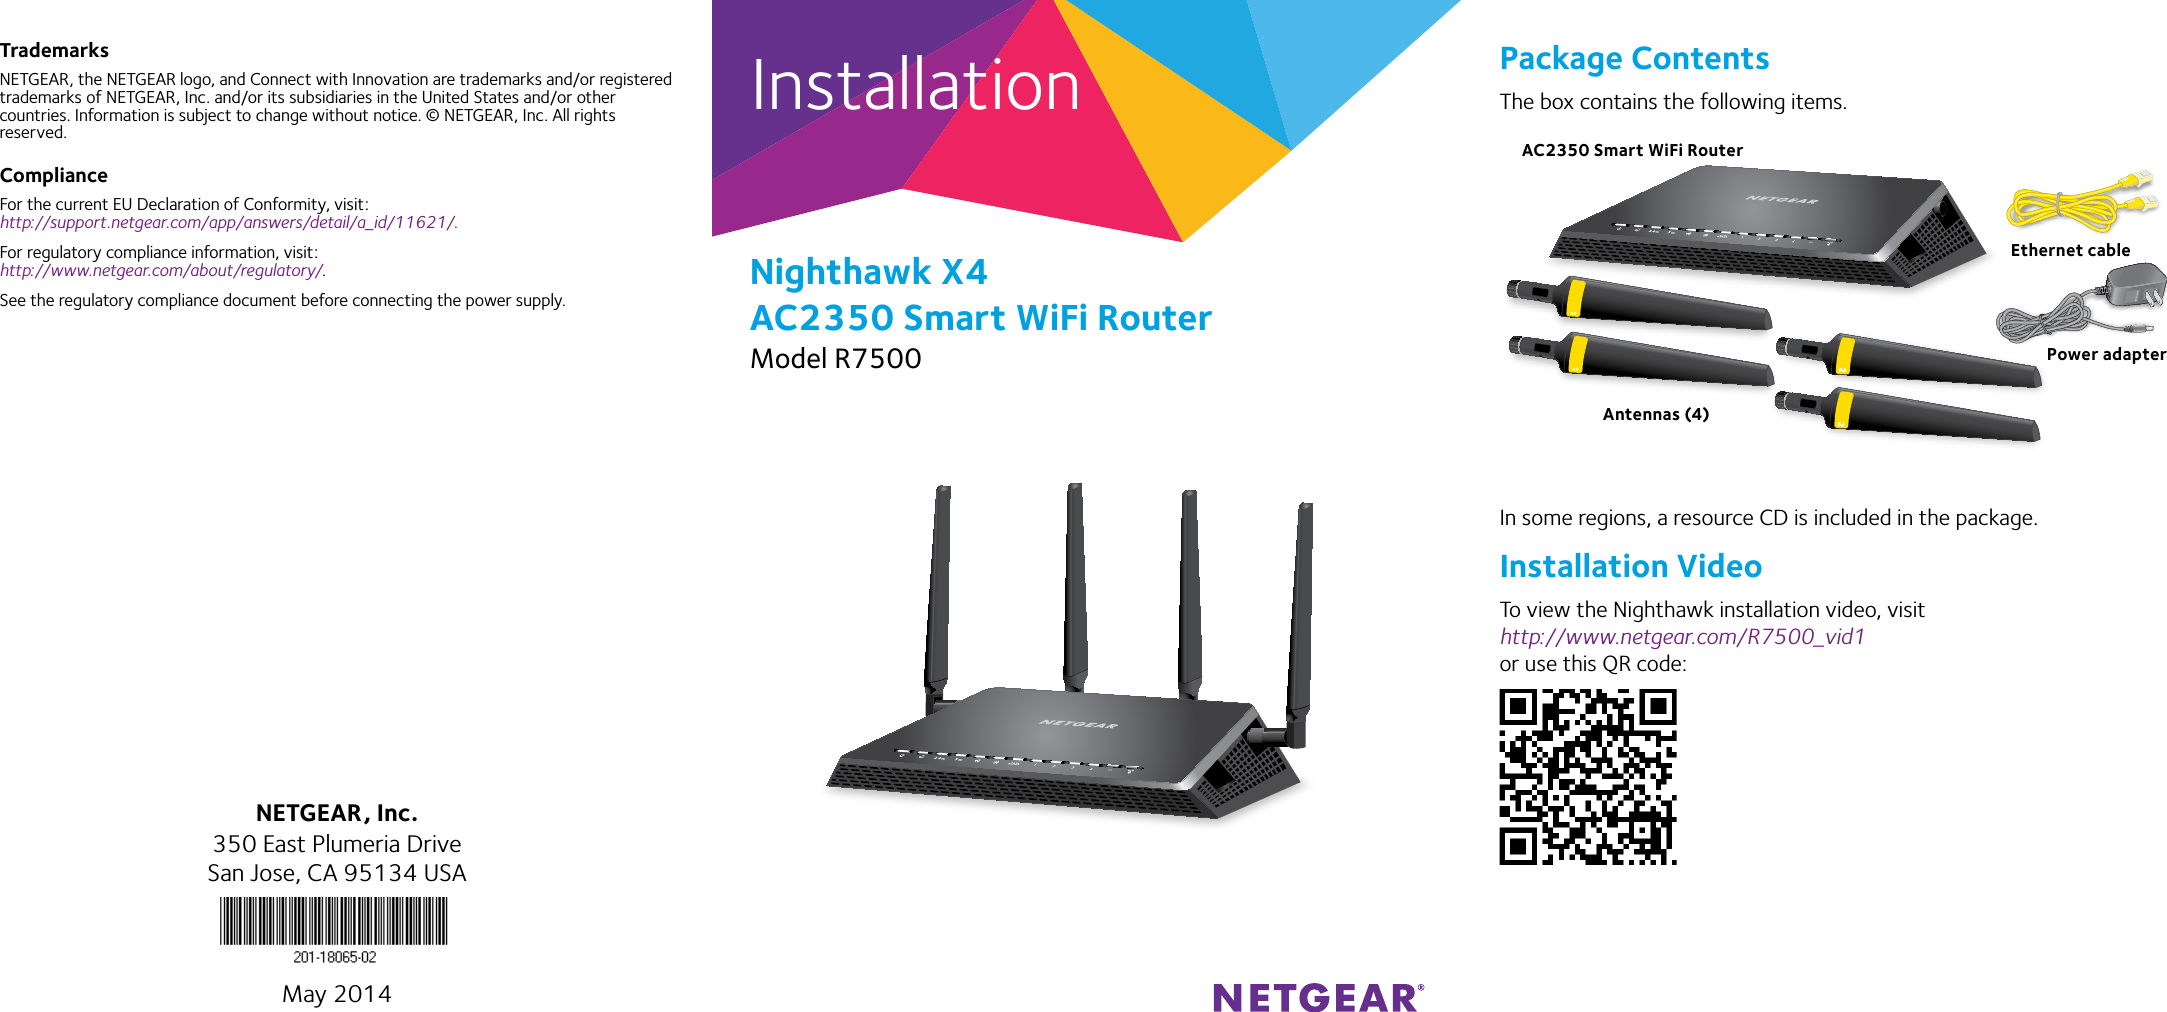 InstallationNighthawk X4 AC2350 Smart WiFi RouterModel R7500TrademarksNETGEAR, the NETGEAR logo, and Connect with Innovation are trademarks and/or registered trademarks of NETGEAR, Inc. and/or its subsidiaries in the United States and/or other countries. Information is subject to change without notice. © NETGEAR, Inc. All rights reserved.ComplianceFor the current EU Declaration of Conformity, visit:  http://support.netgear.com/app/answers/detail/a_id/11621/. For regulatory compliance information, visit: http://www.netgear.com/about/regulatory/.See the regulatory compliance document before connecting the power supply.Package ContentsThe box contains the following items.In some regions, a resource CD is included in the package.Installation VideoTo view the Nighthawk installation video, visit http://www.netgear.com/R7500_vid1 or use this QR code:NETGEAR, Inc.350 East Plumeria DriveSan Jose, CA 95134 USAMay 2014AC2350 Smart WiFi RouterEthernet cablePower adapterAntennas (4)